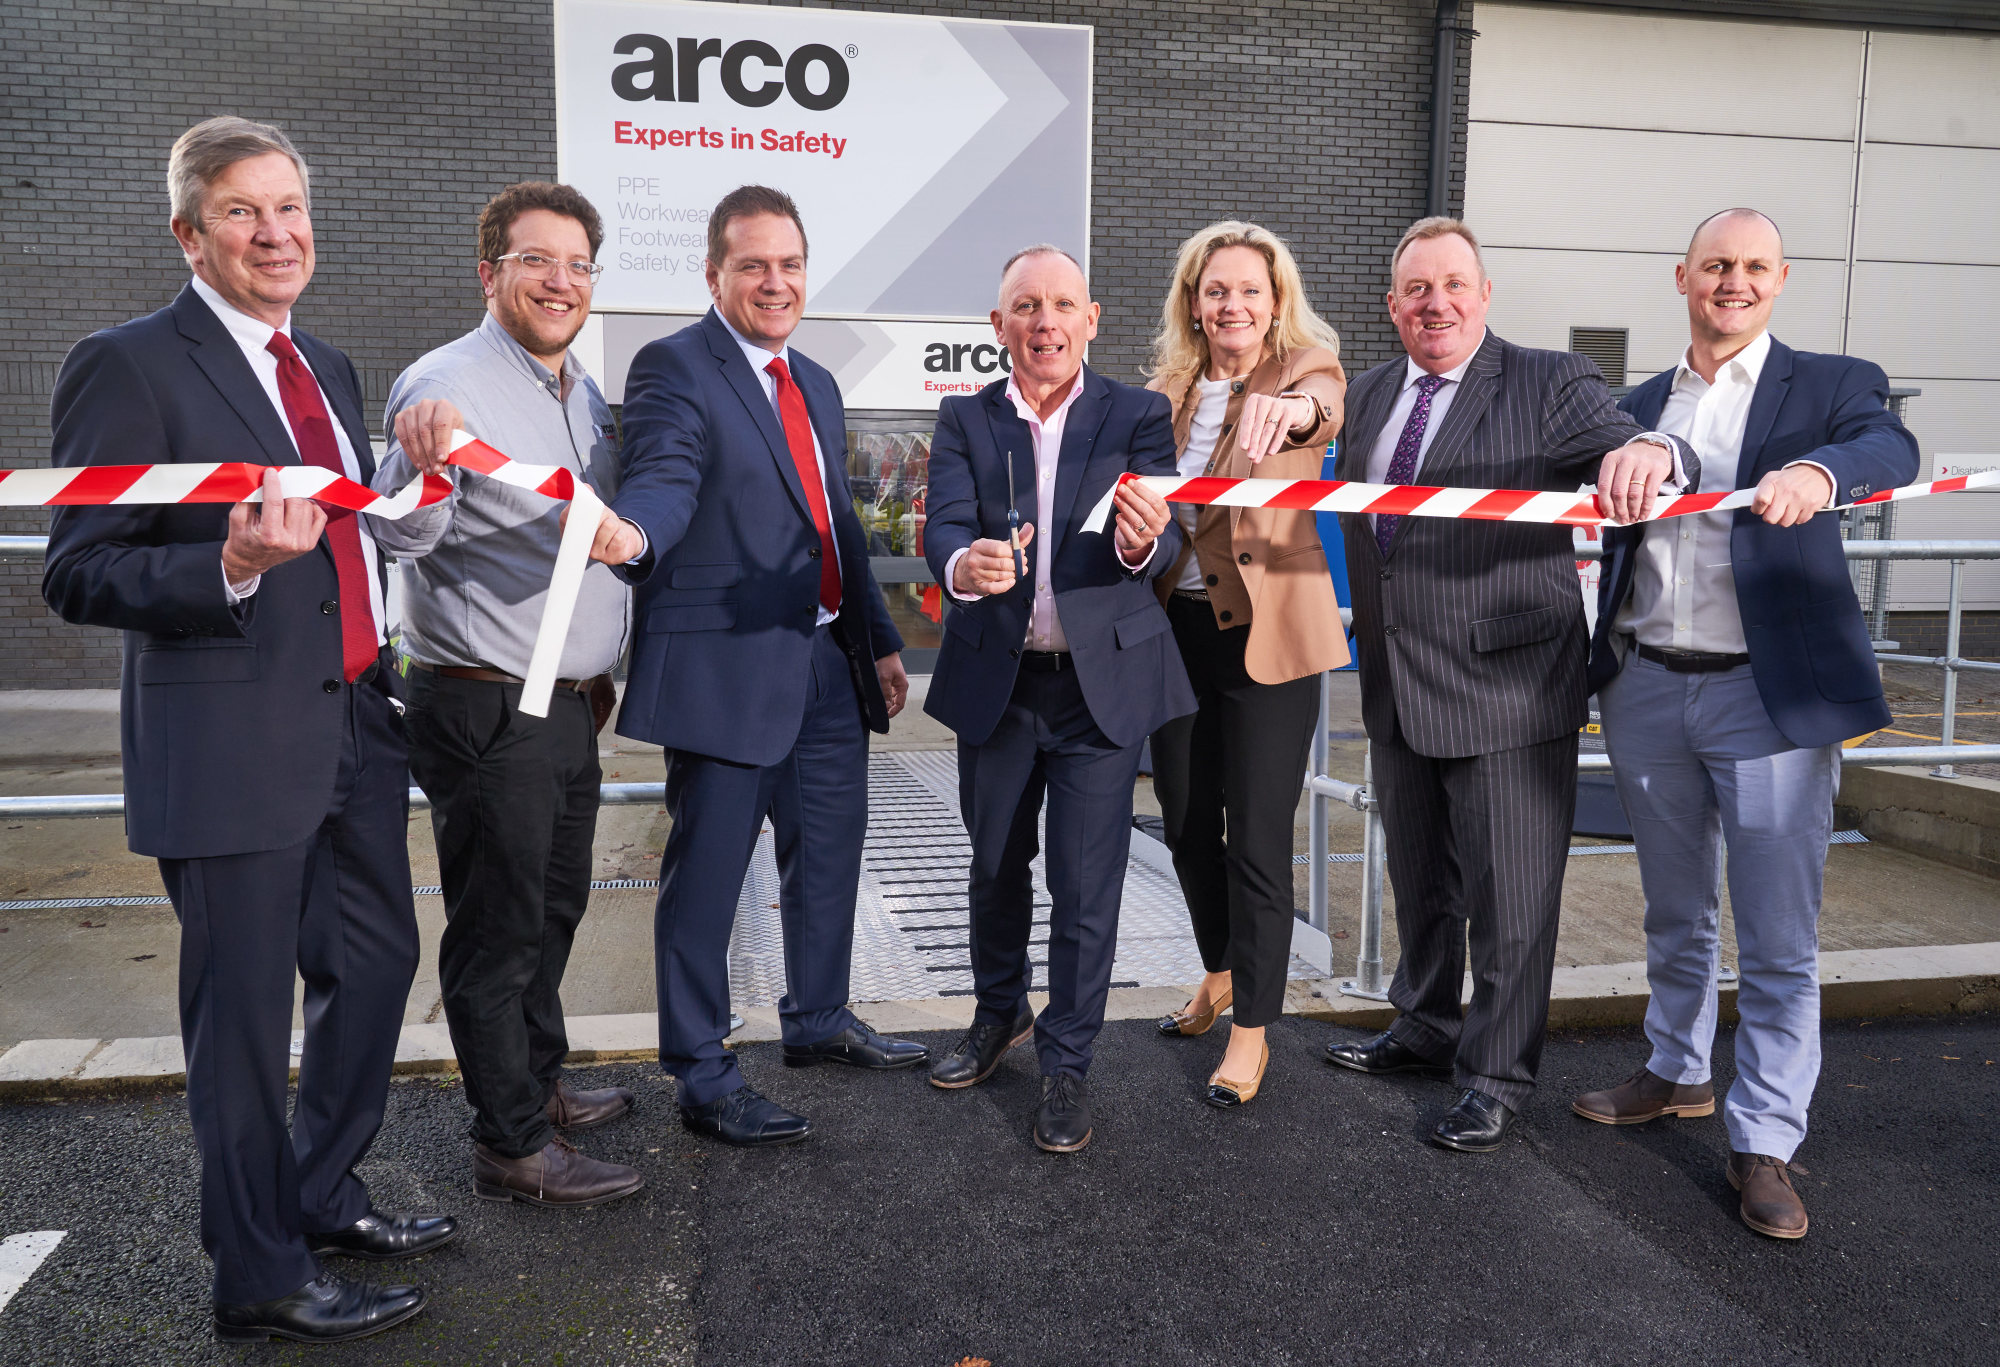 Arco Opens New £2m Safety Training Centre